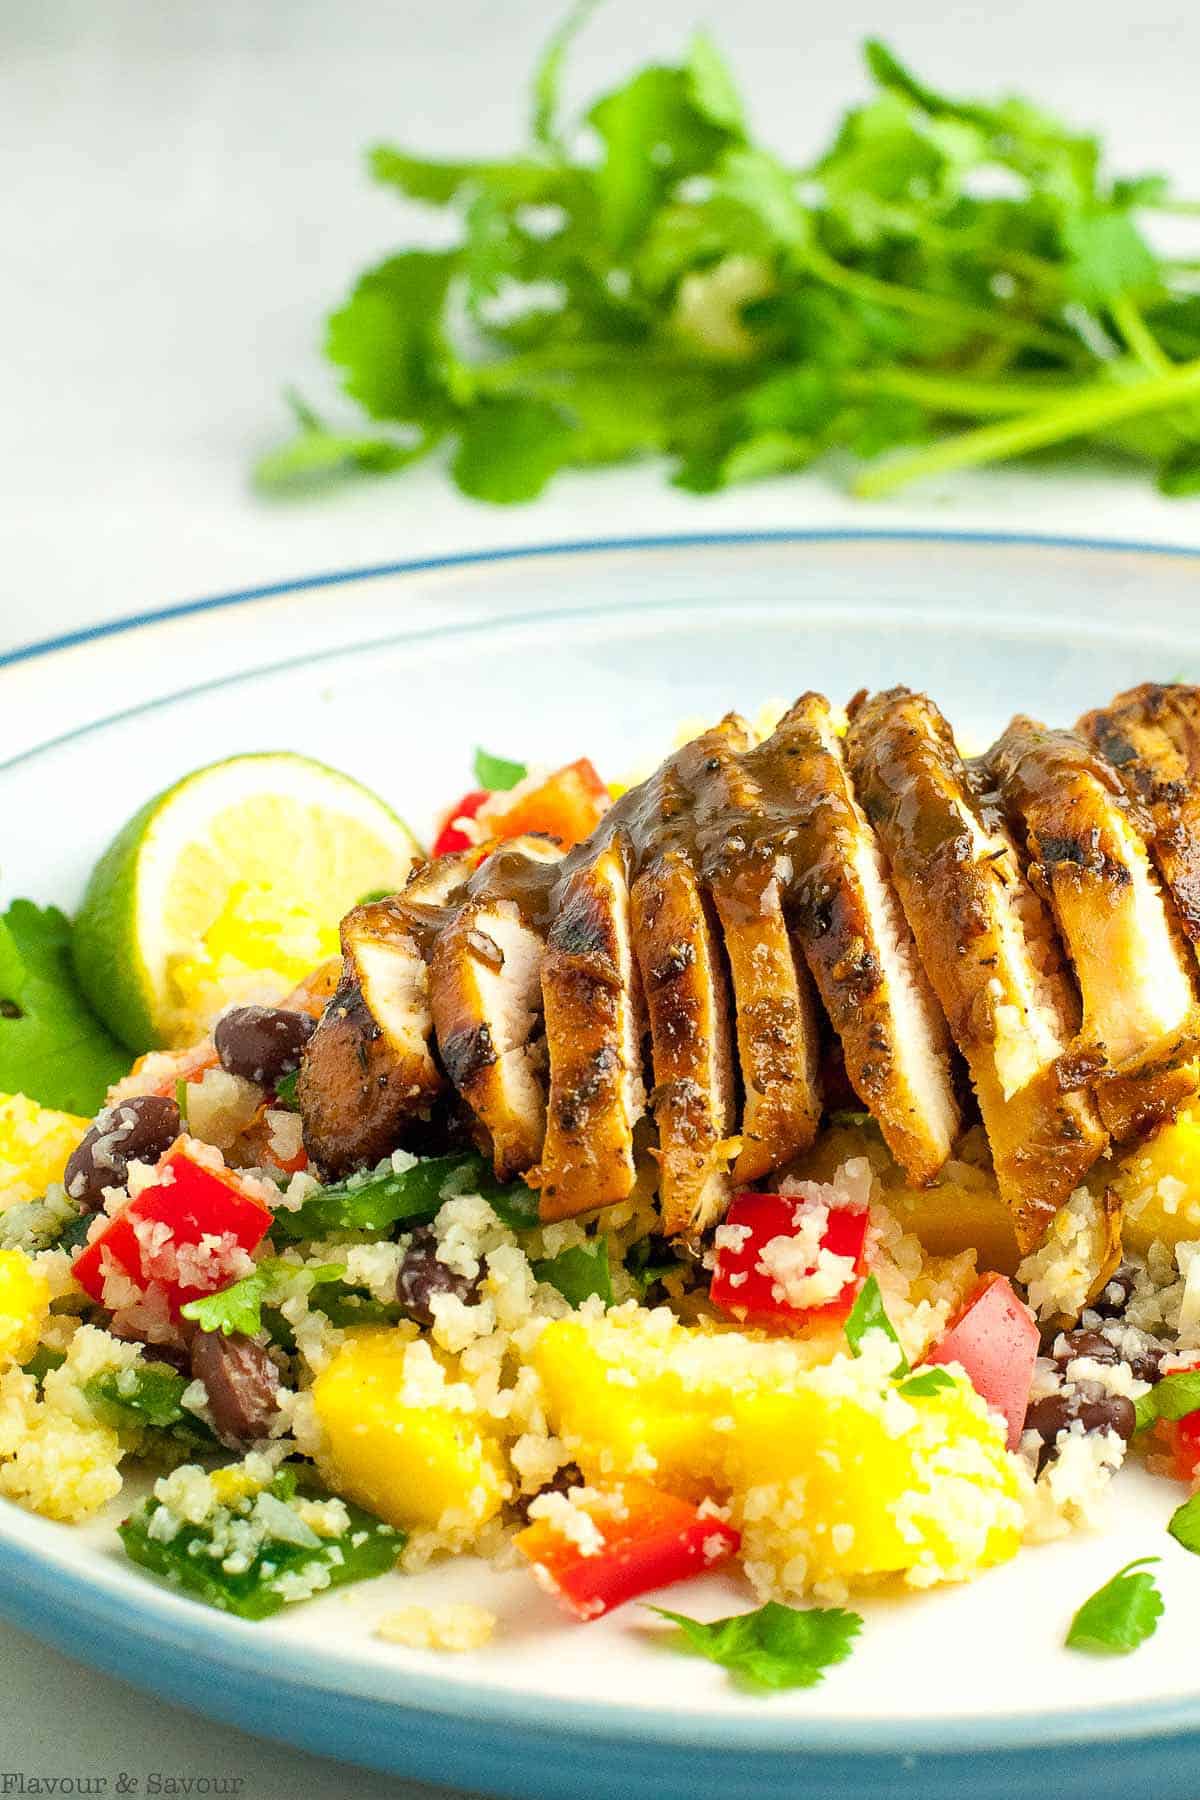 Sliced chicken breast with jerk marinade on top of Caribbean couscous salad.